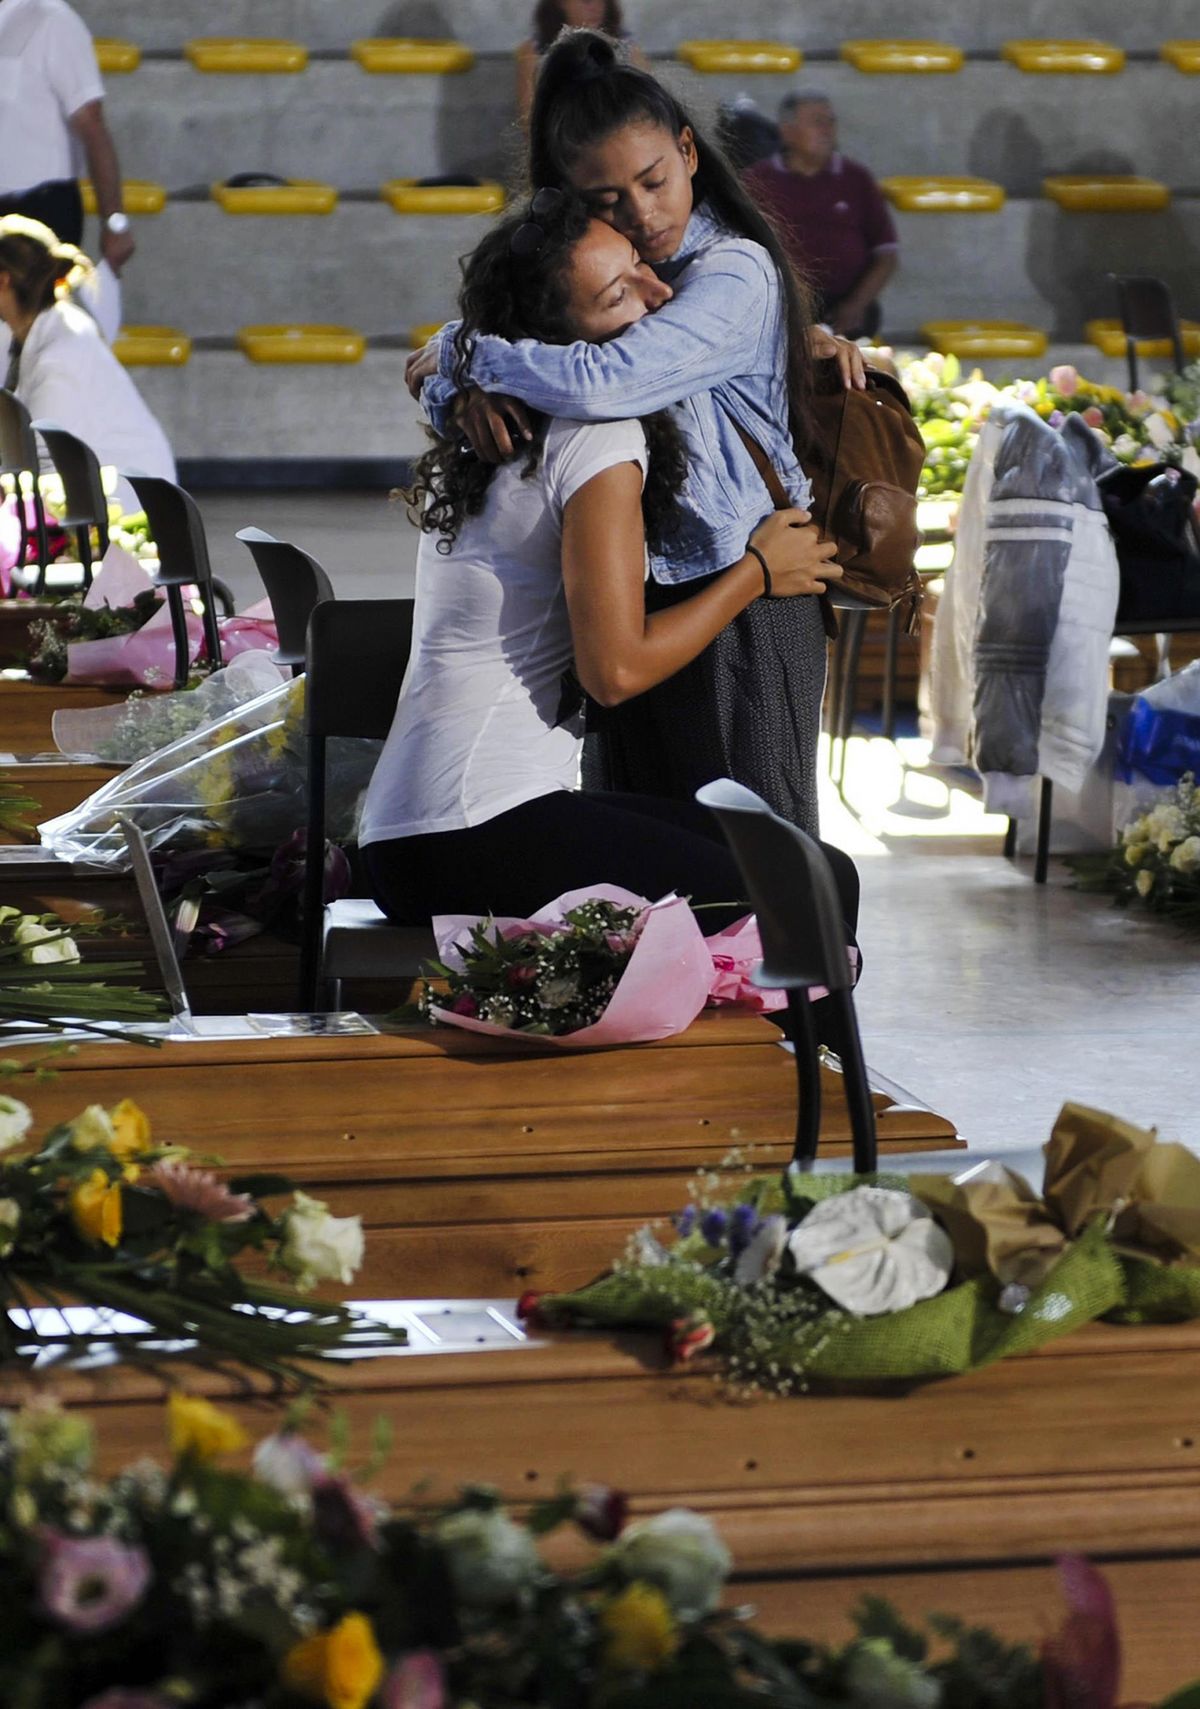 Two girls embrace each other in Ascoli Piceno, central Italy, Saturday, Aug. 27, 2016, as they wait for the start of a mass funeral for some of the victims of the earthquake that devastated central Italy on Wednesday. (Cristiano Chiodi / Associated Press)